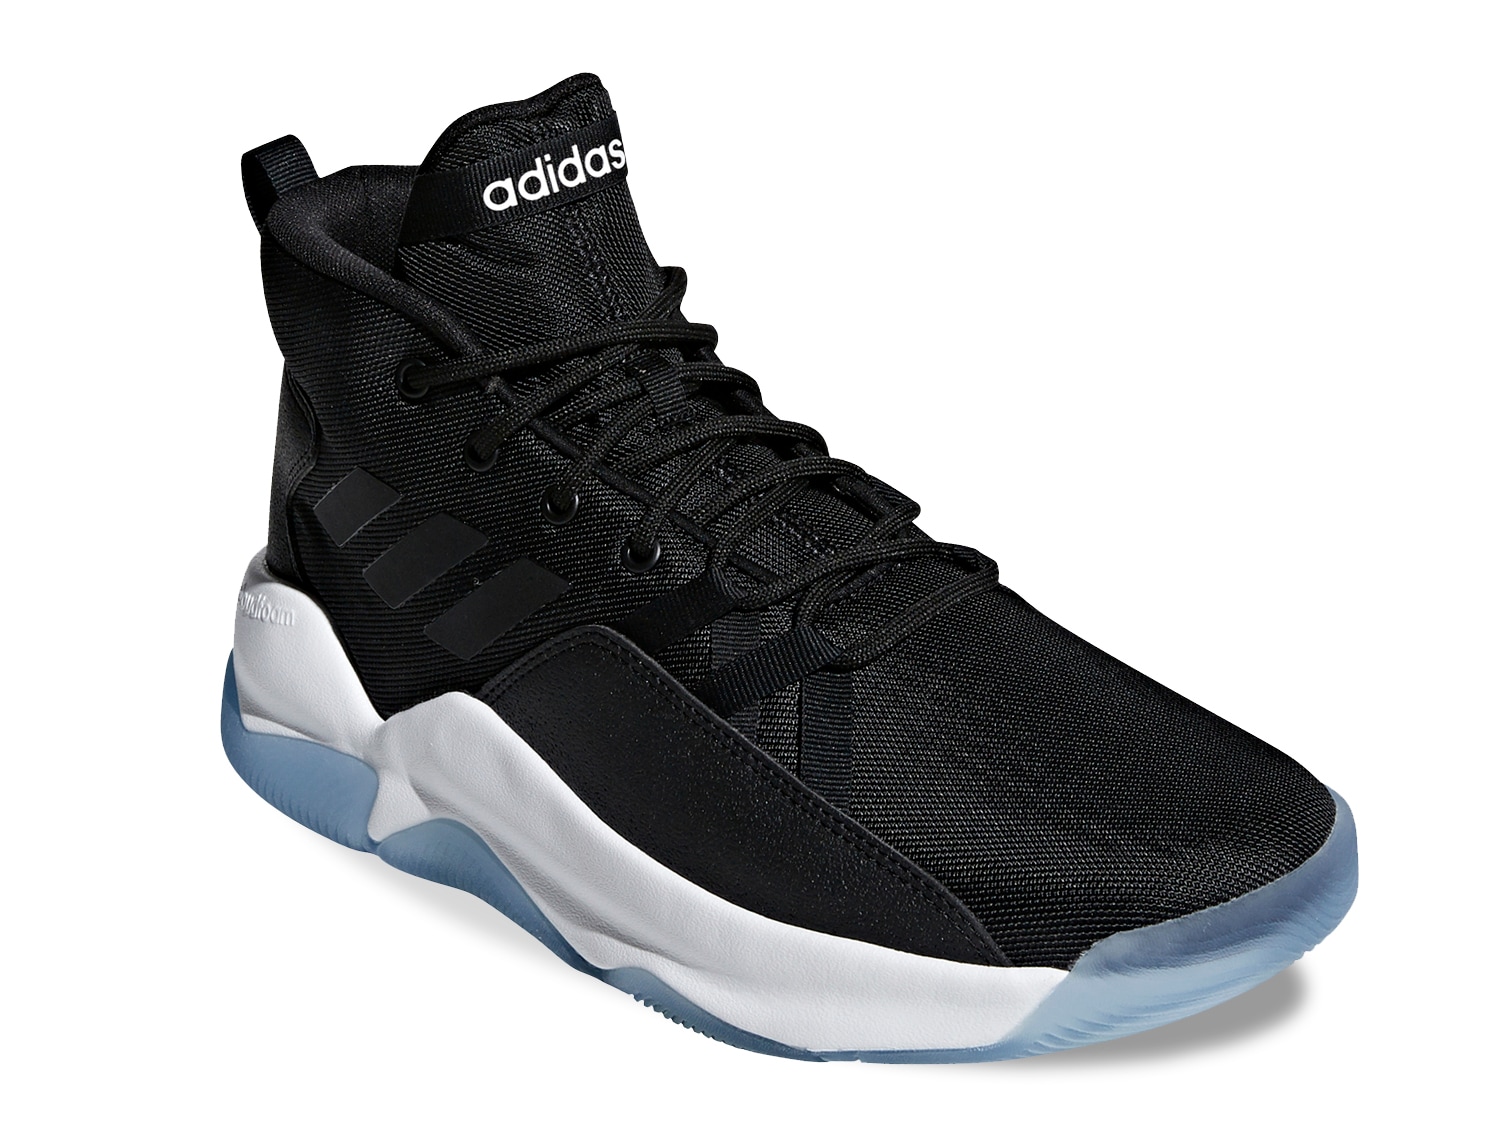 adidas streetfire basketball shoes review